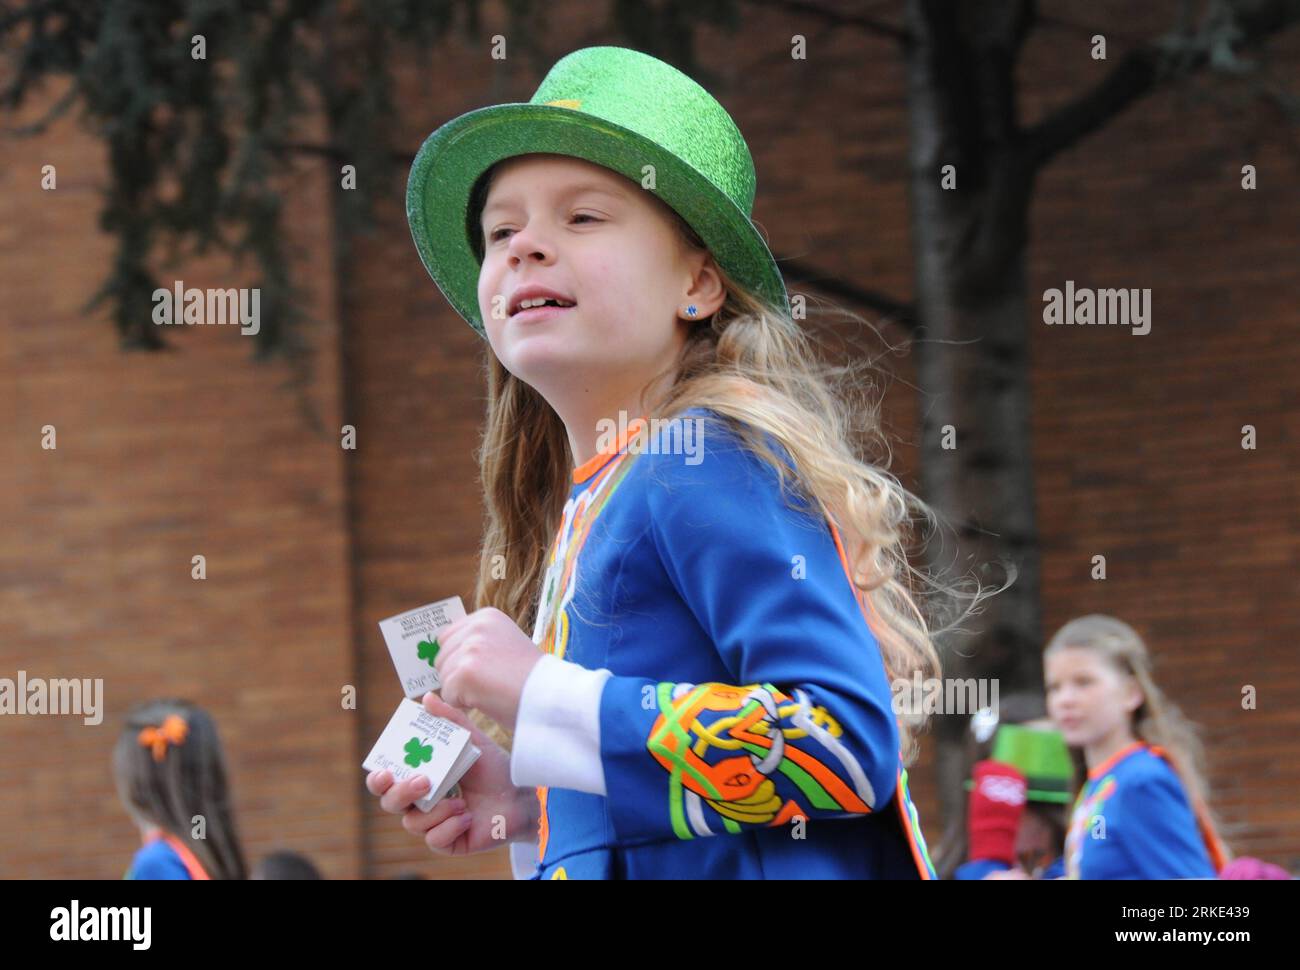 Bildnummer: 55049038 Datum: 21.03.2011 Copyright: imago/Xinhua (110321) --  VANCOUVER, March 21, 2011 (Xinhua) -- A girl who wears a green hat and  holds clover stickers in her hands joins the parade of